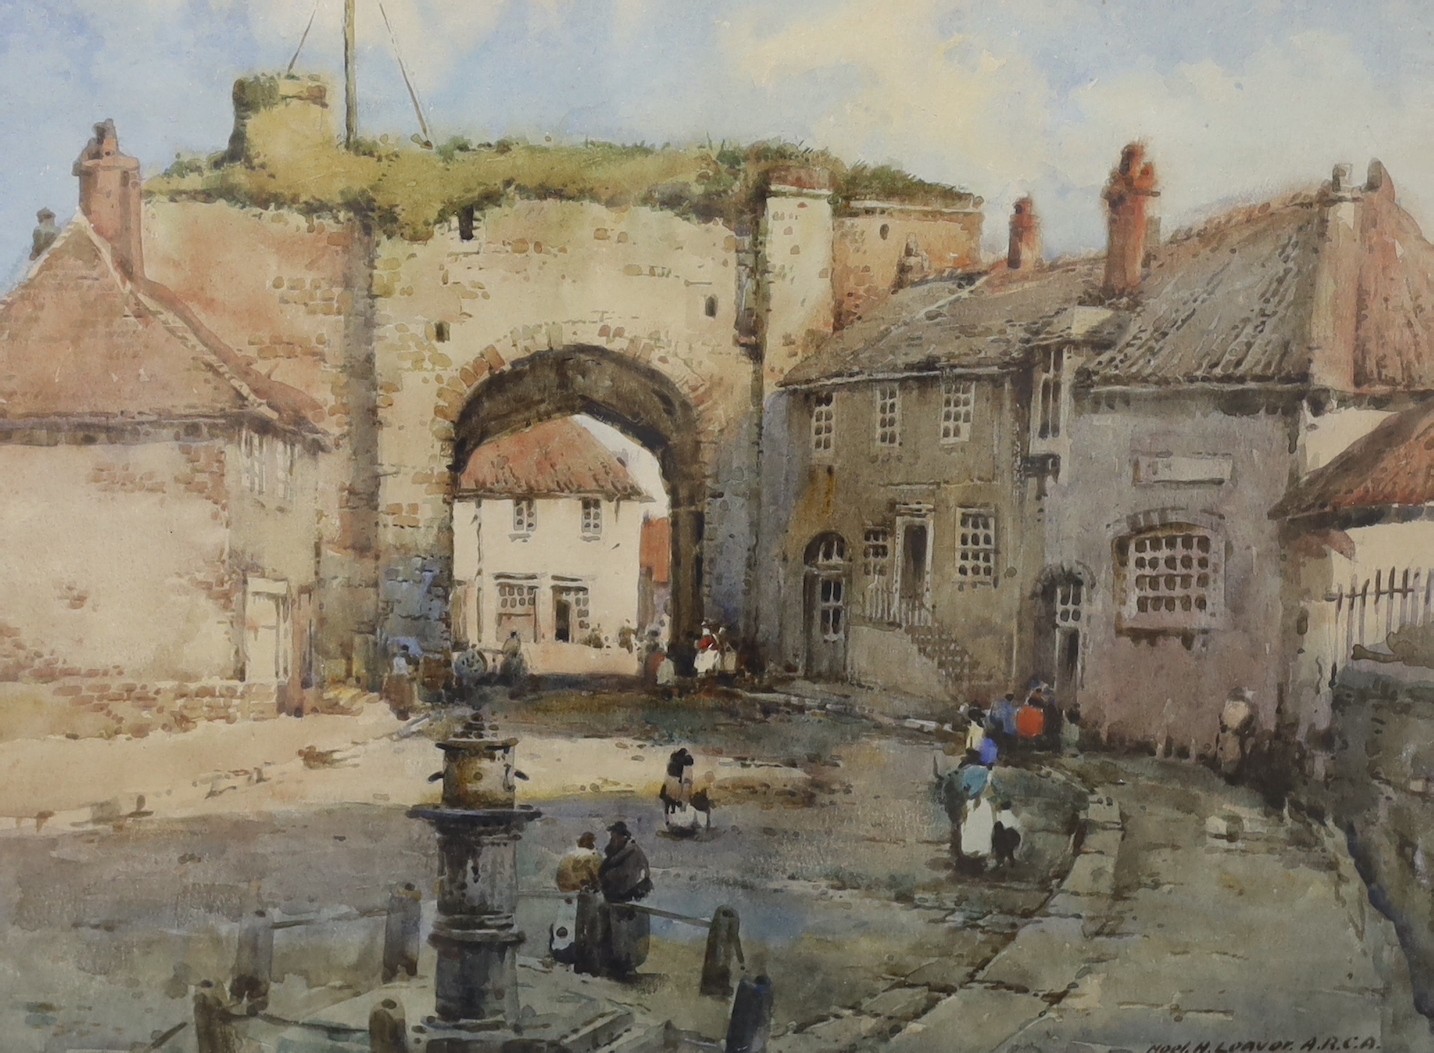 Noel Henry Leaver (1889-1951), two watercolours, 'A street scene in Normandy' and 'A street scene with archway', both signed, 37 x 27cm and 26 x 36cm